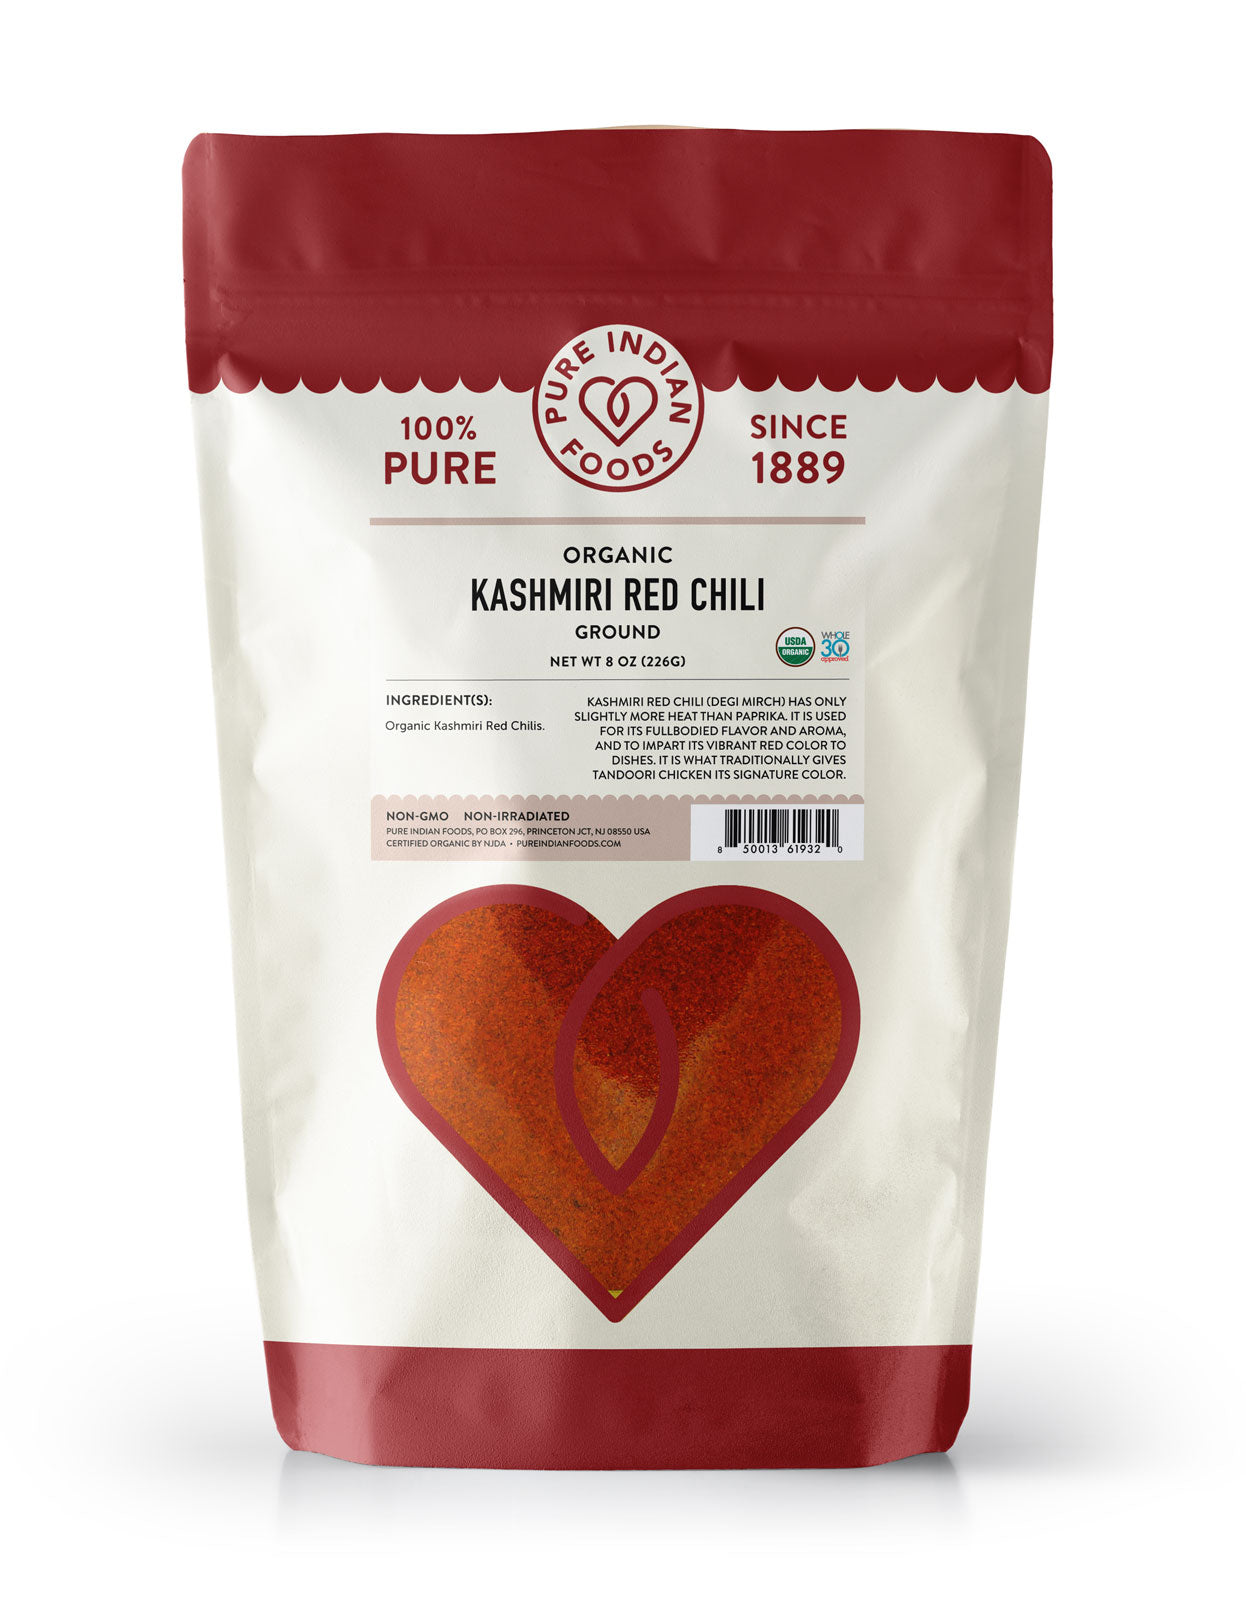 Bag of Pure Indian Foods Kashmiri Chili Powder (deggi mirch). Certified organic. 100% Pure. No dyes, coloring, or additives. Non-irradiated. Beautiful, rich, red color and mild flavor. Perfect for Tandoori Chicken.